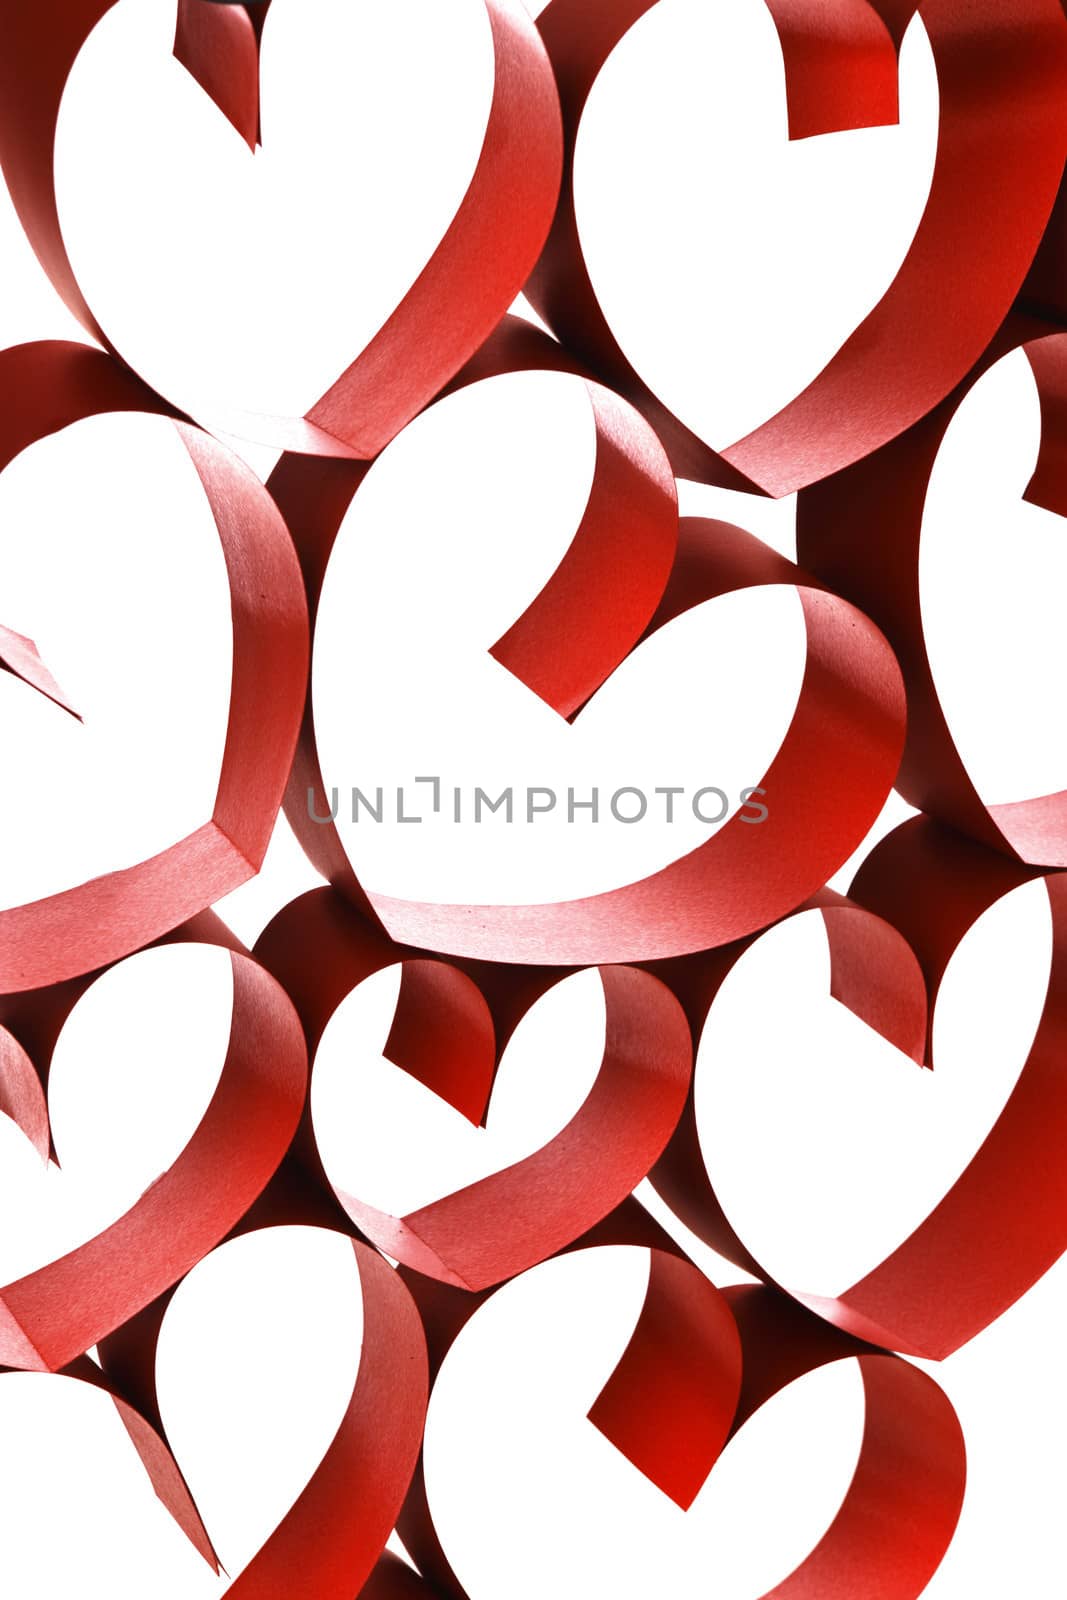 Red ribbon hearts decoration on white background